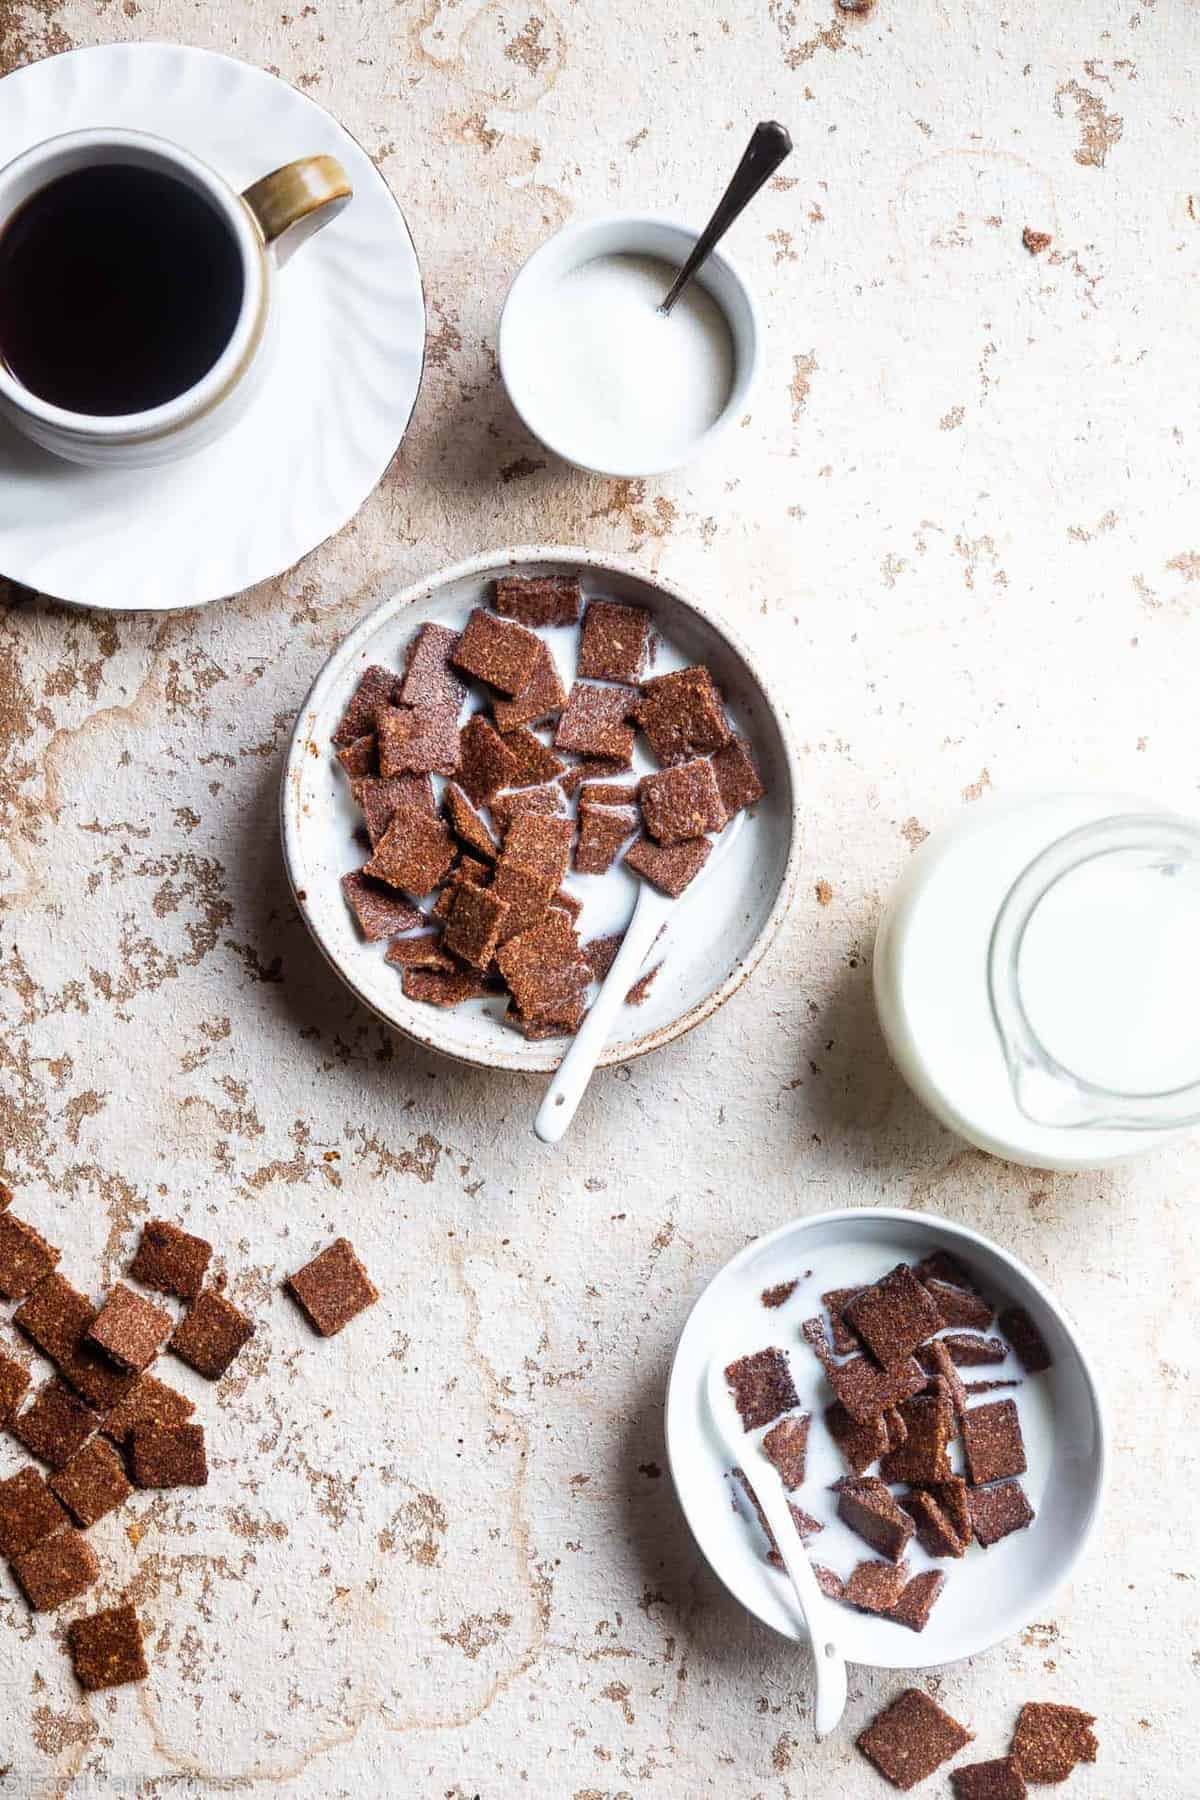 Cinnamon Homemade Keto Low Carb Cereal - This easy, paleo friendly Homemade sugar free Cereal tastes like cinnamon toast crunch but its gluten/grain/dairy/sugar free and healthy! Only 6 ingredients too! | #Foodfaithfitness | 